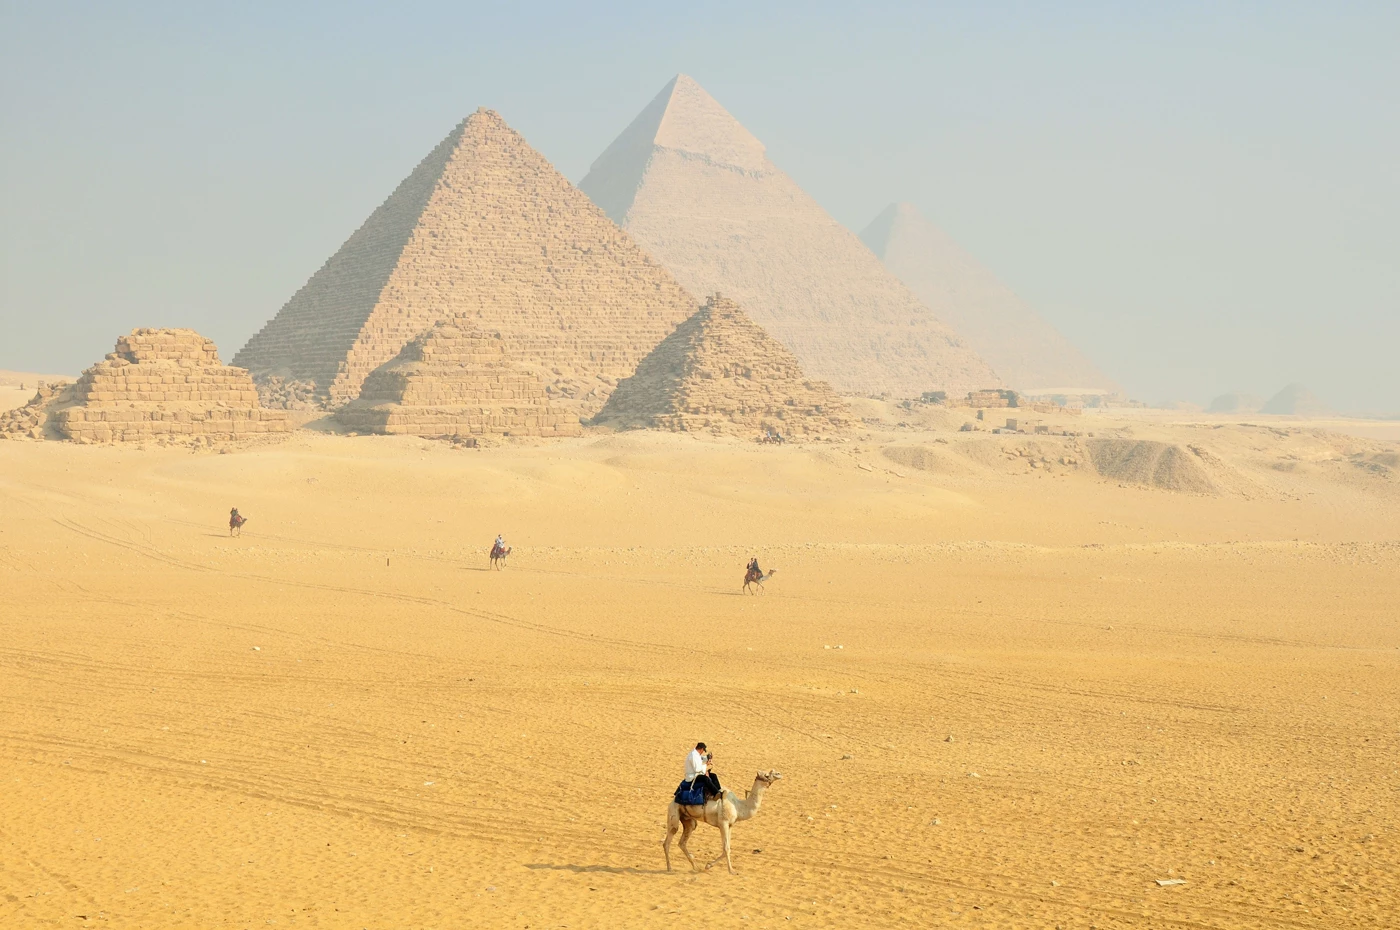 The Great Pyramid of Giza in the distance surrounded by smaller pyramids on a dusty, sunny day